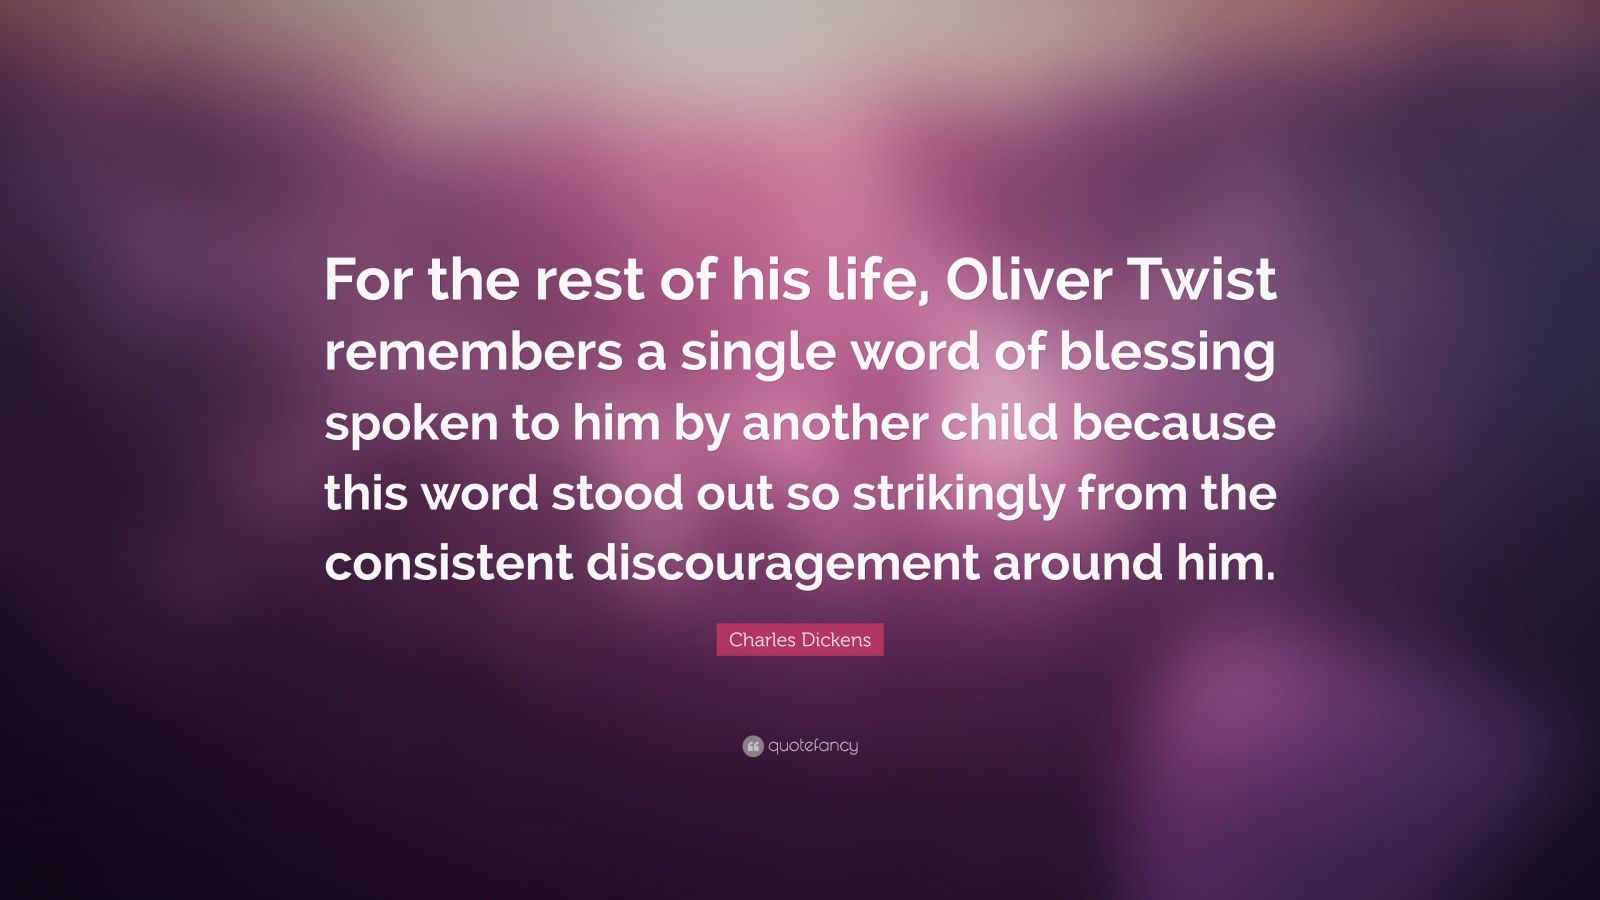 Charles Dickens Quote: “For the rest of his life, Oliver Twist